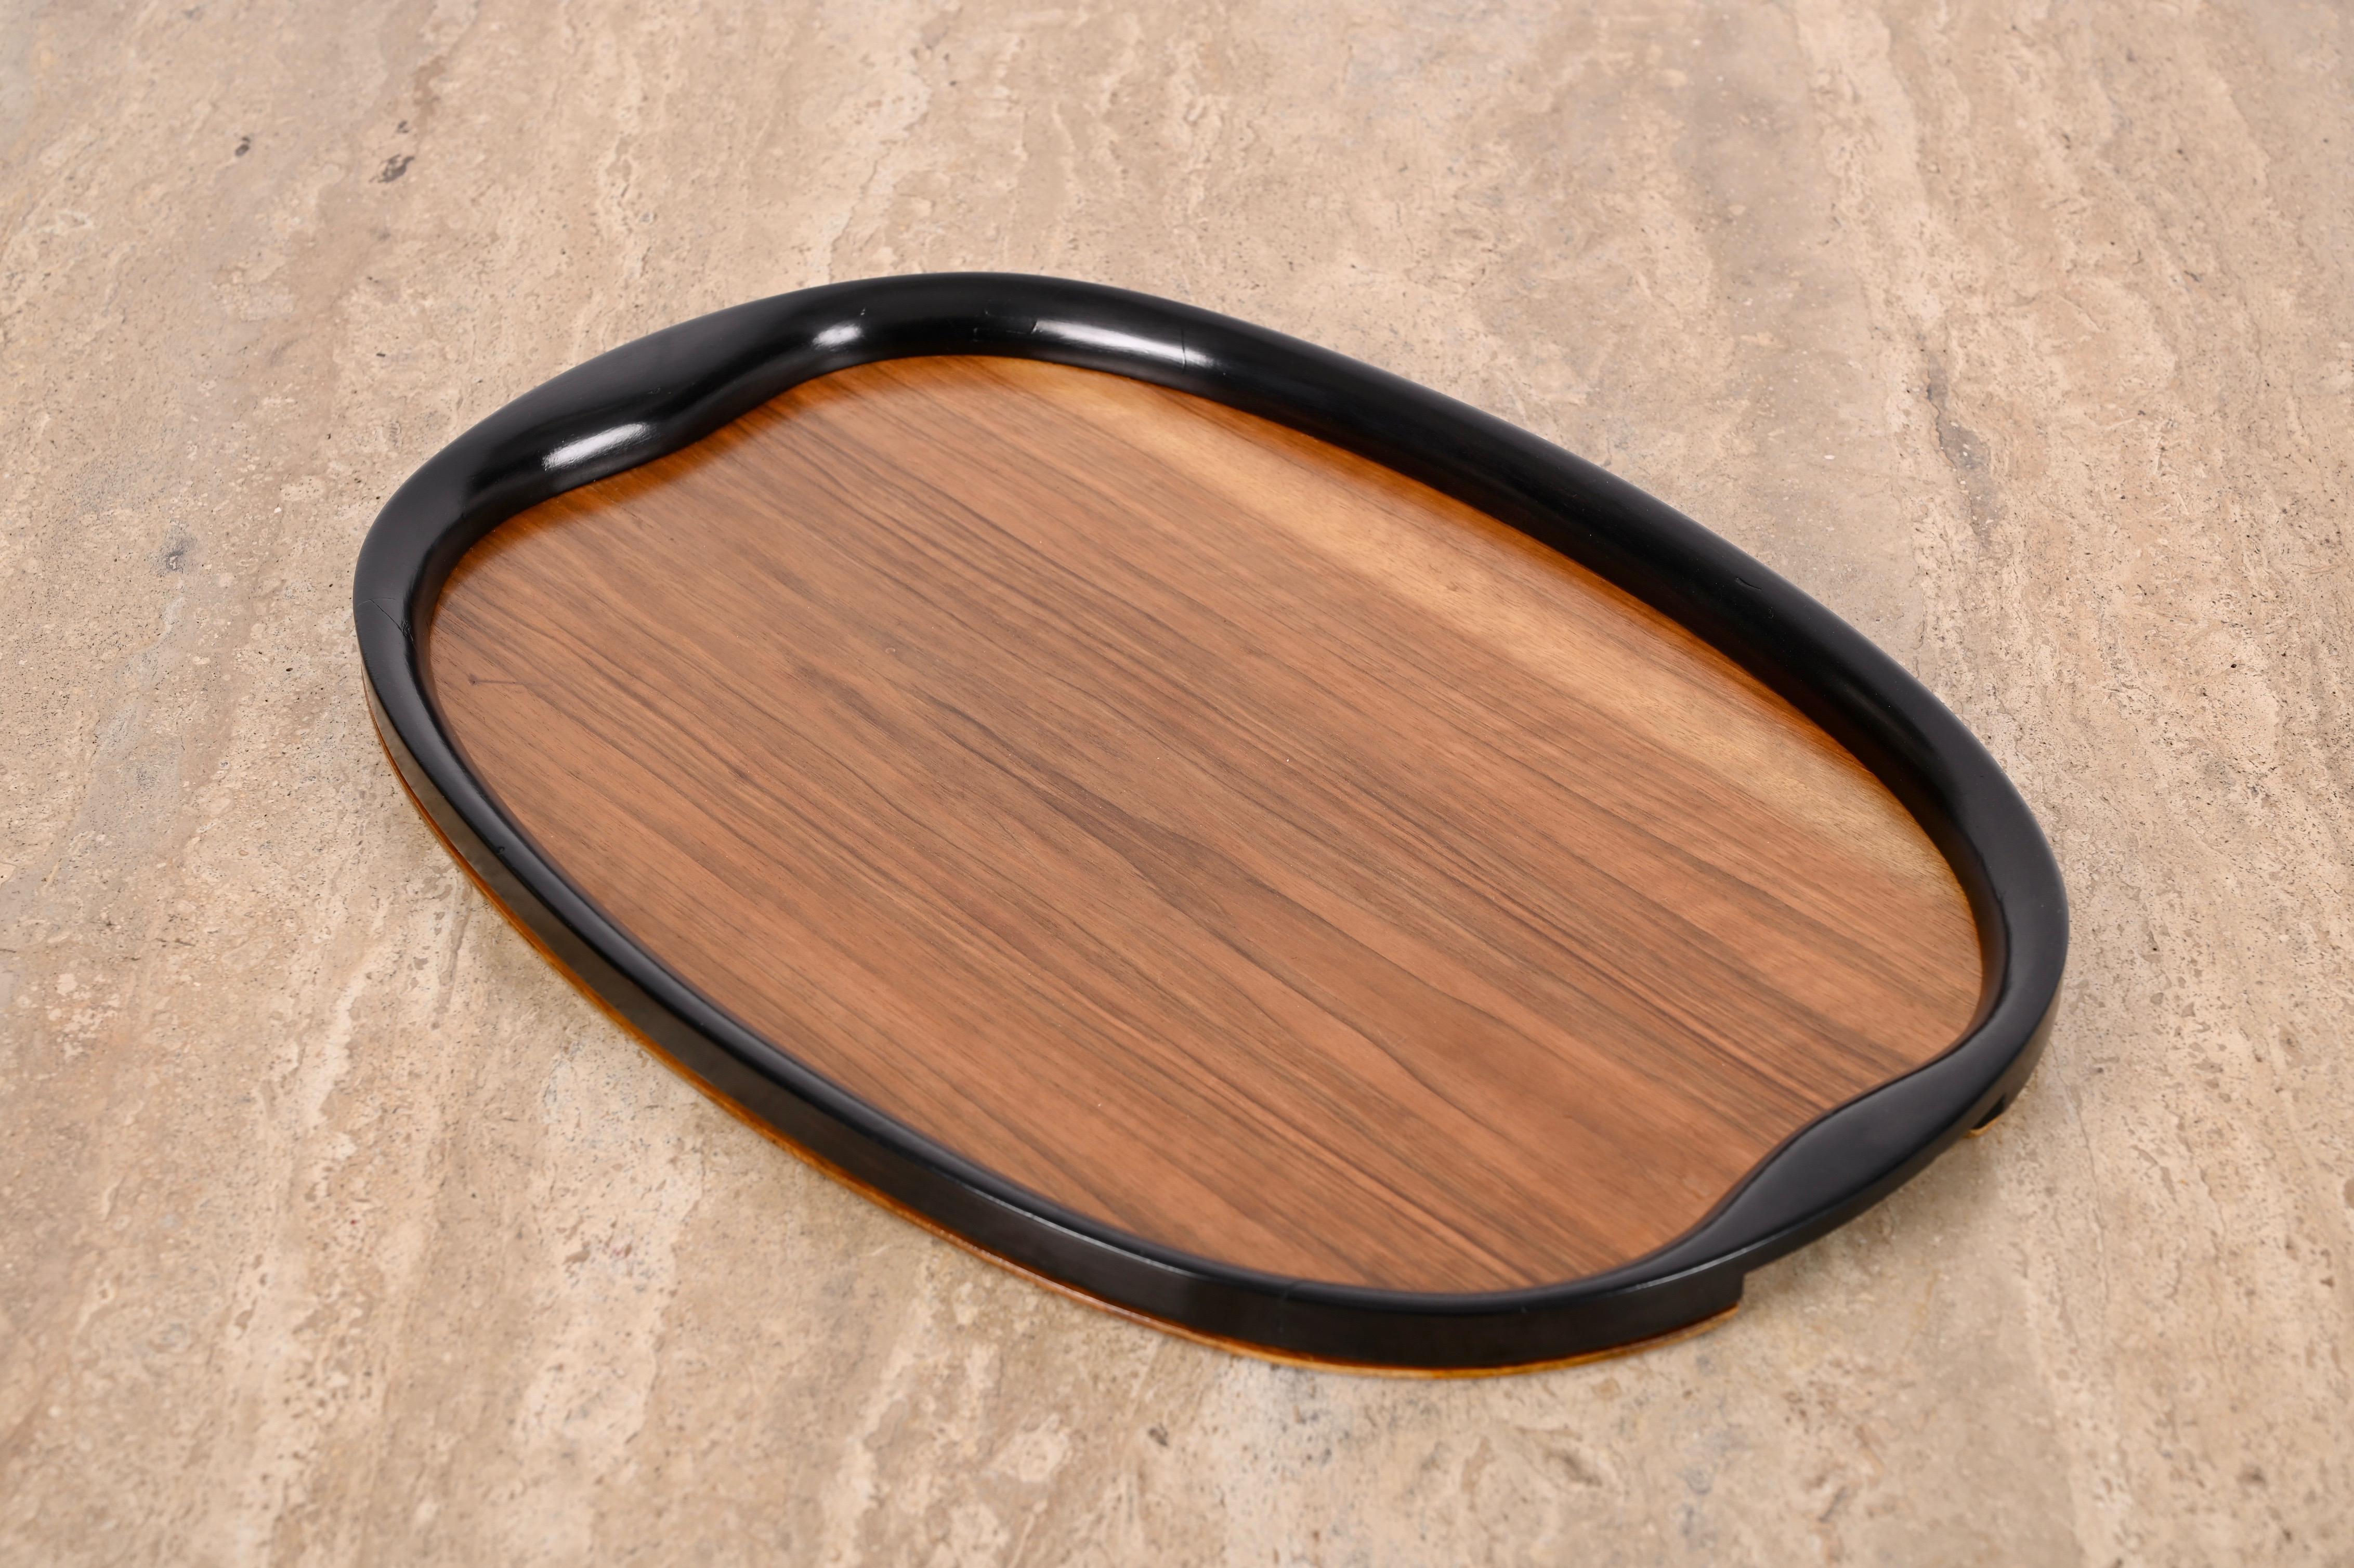 Pair of Art Deco Serving Trays, Ebonized Wood and Walnut, Italy, 1940s For Sale 7